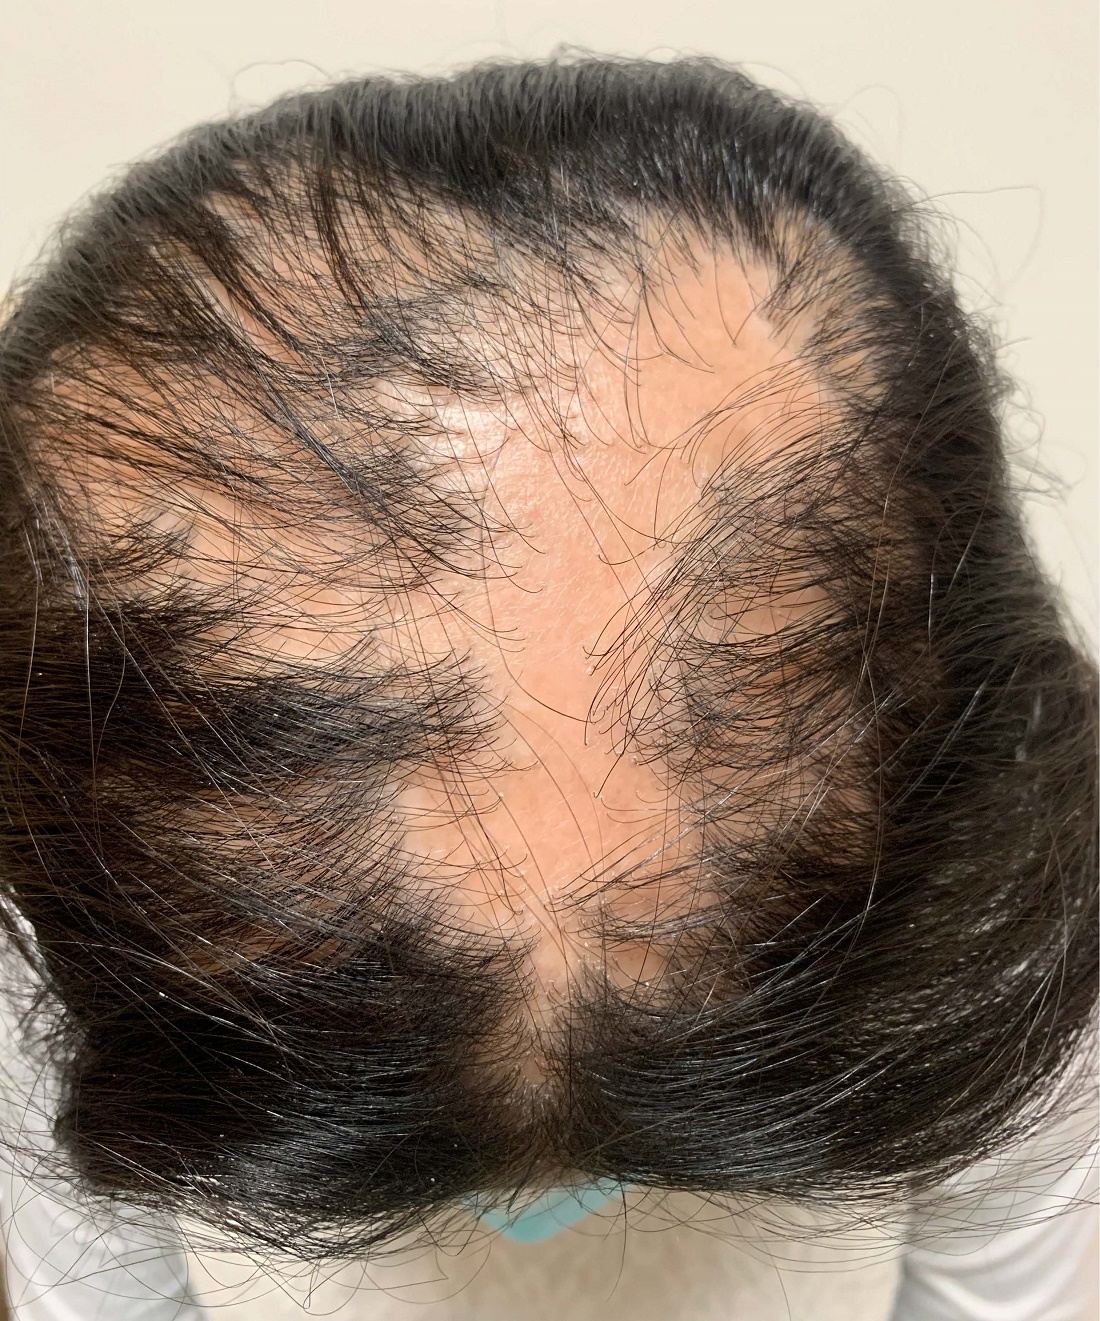 Scalp folliculitis: Symptoms, pictures, causes, shampoos and creams